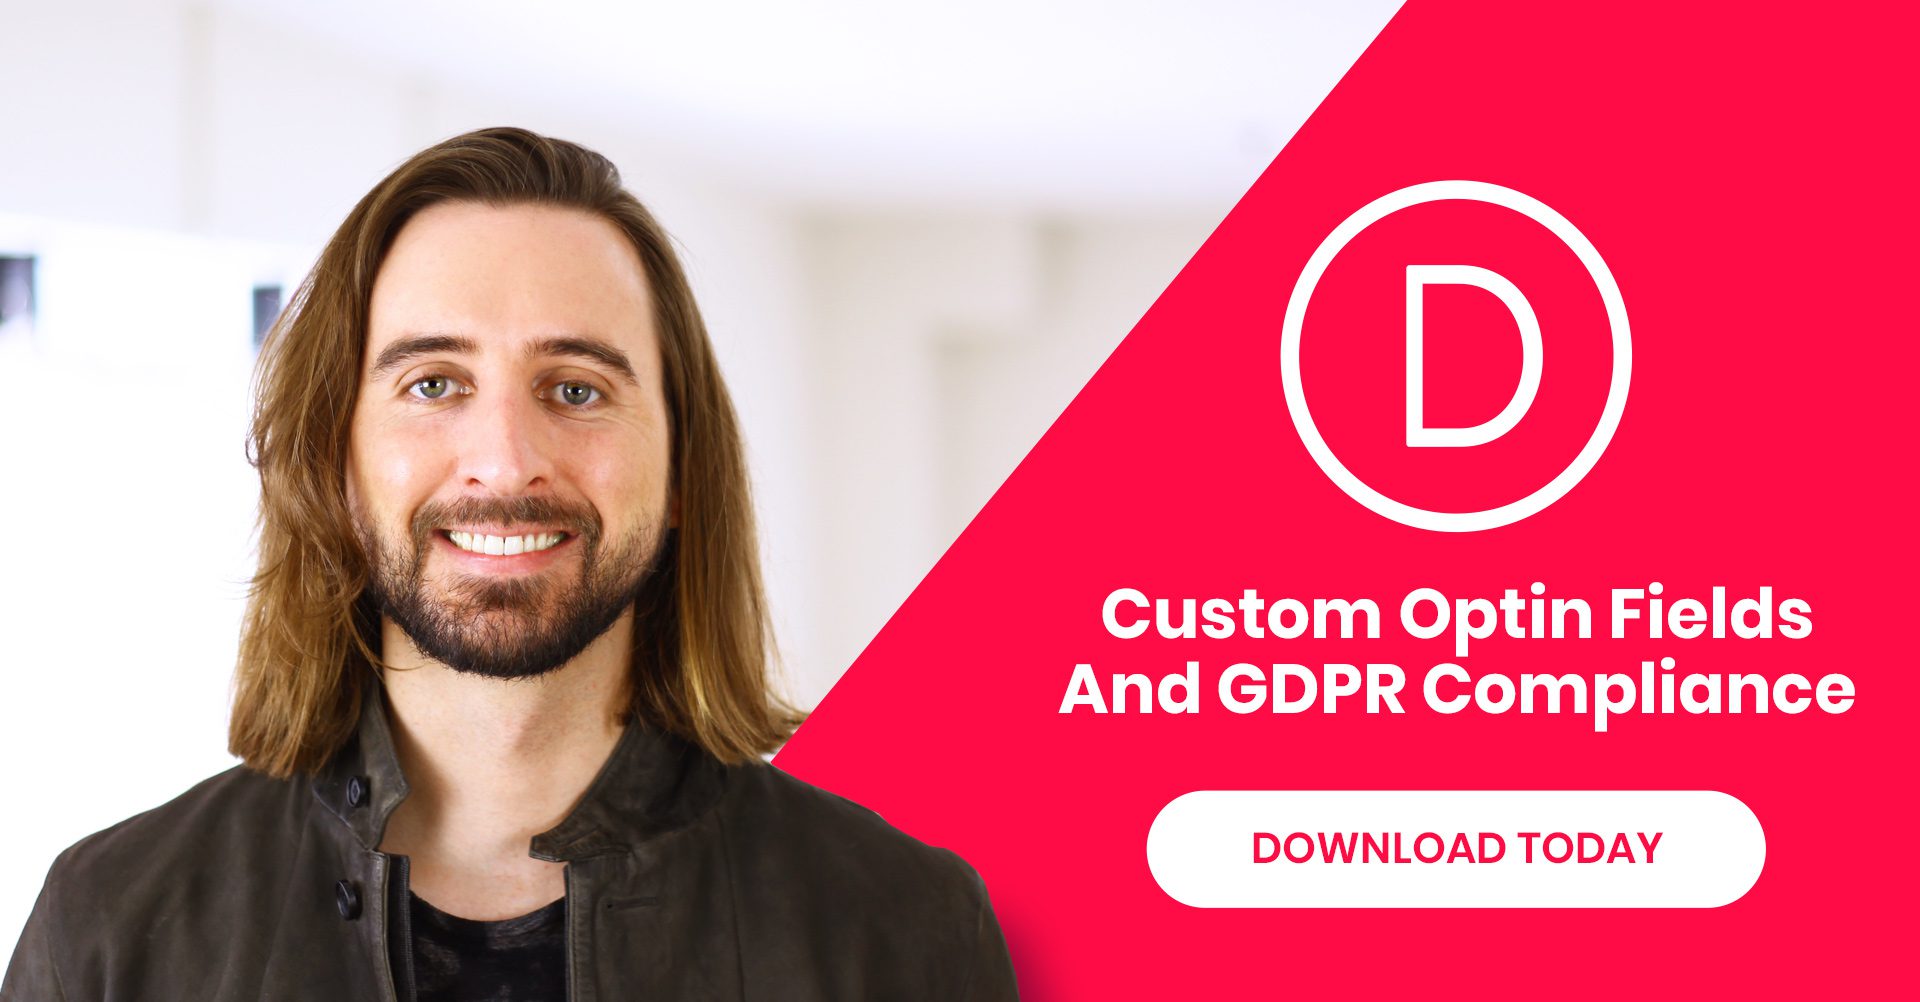 Introducing Custom Field Integration For All Divi Email Providers Plus New GDPR Compliance Options